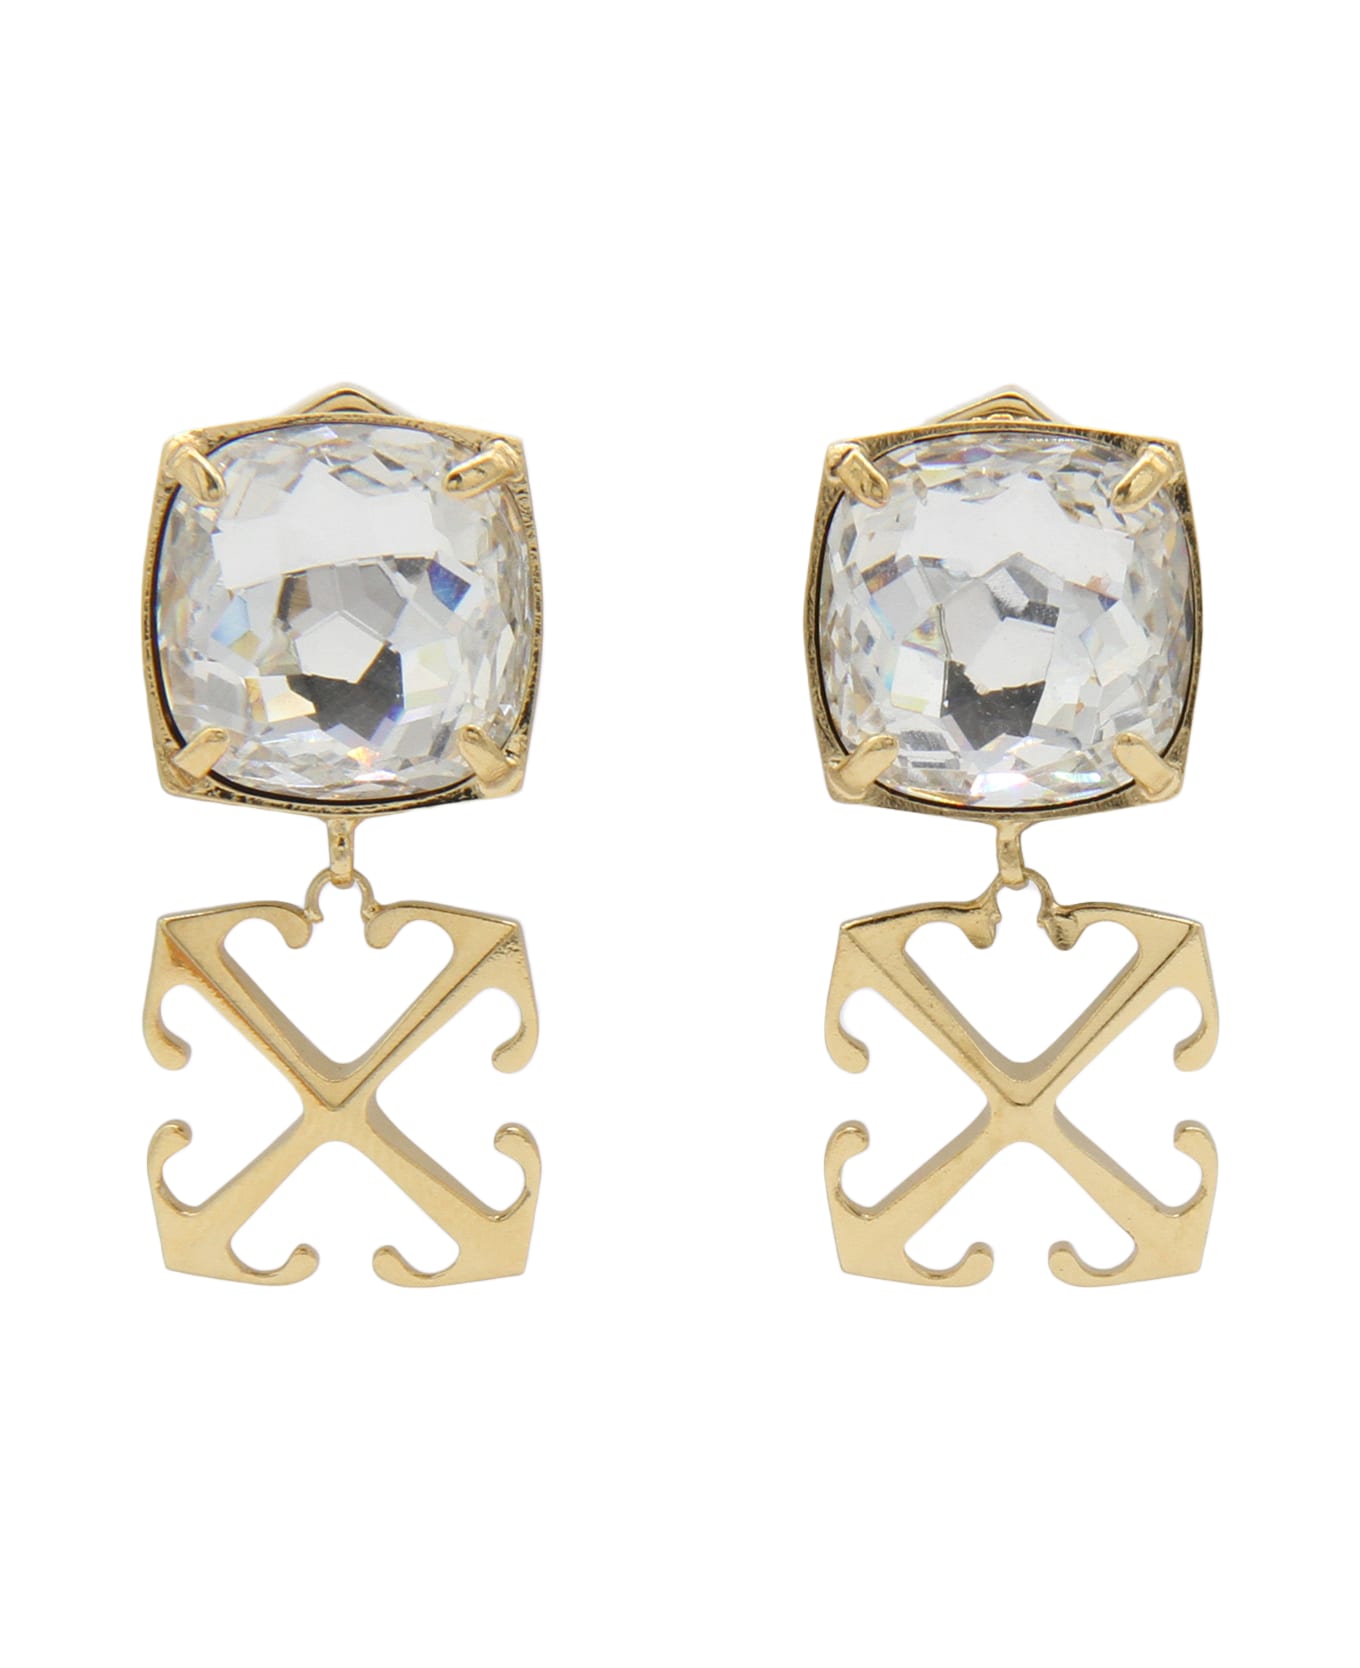 Off-White Gold Brass And Crystal Arrows Earrings - Golden